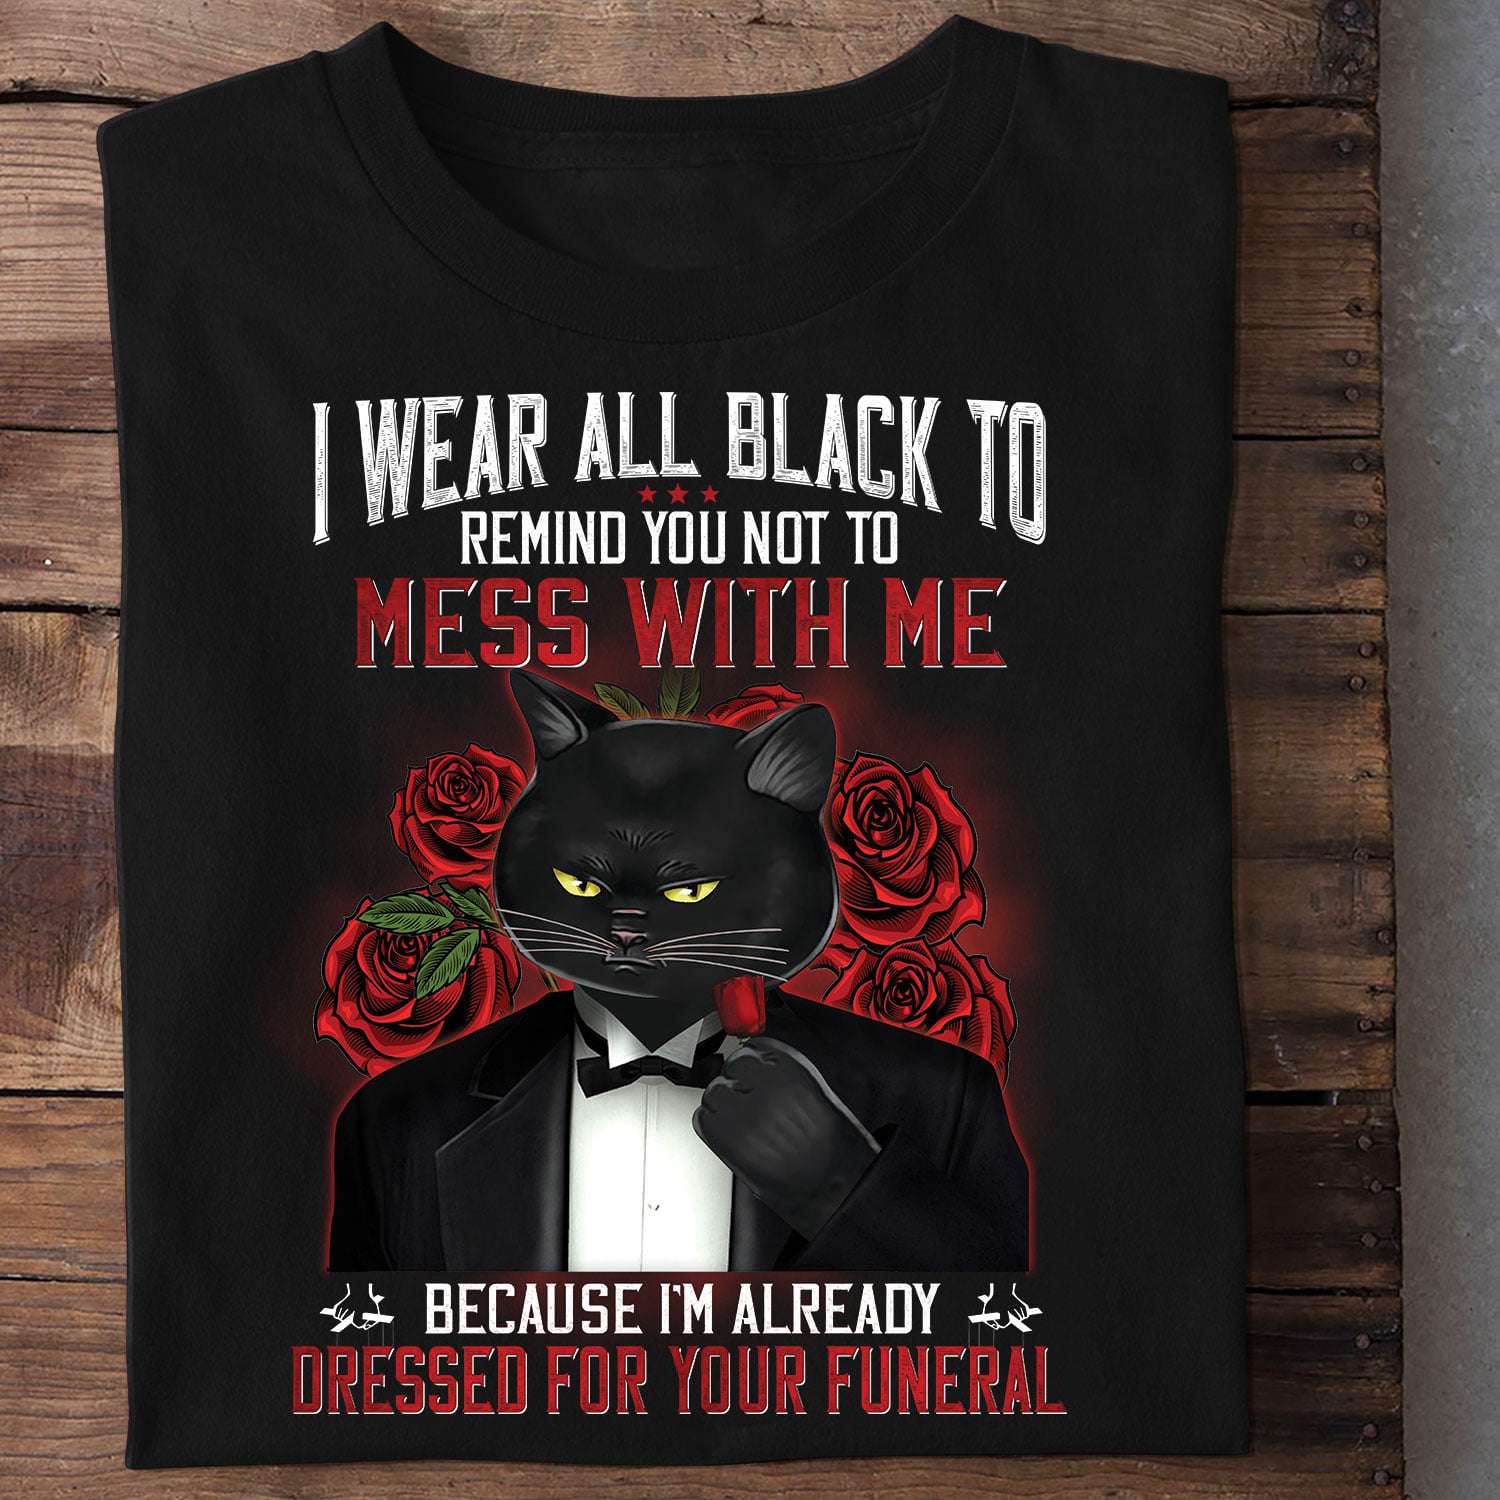 Black Cat Gentleman Red Roses - I wear all black to remind you no to mess with me because i'm already dressed for your funeral